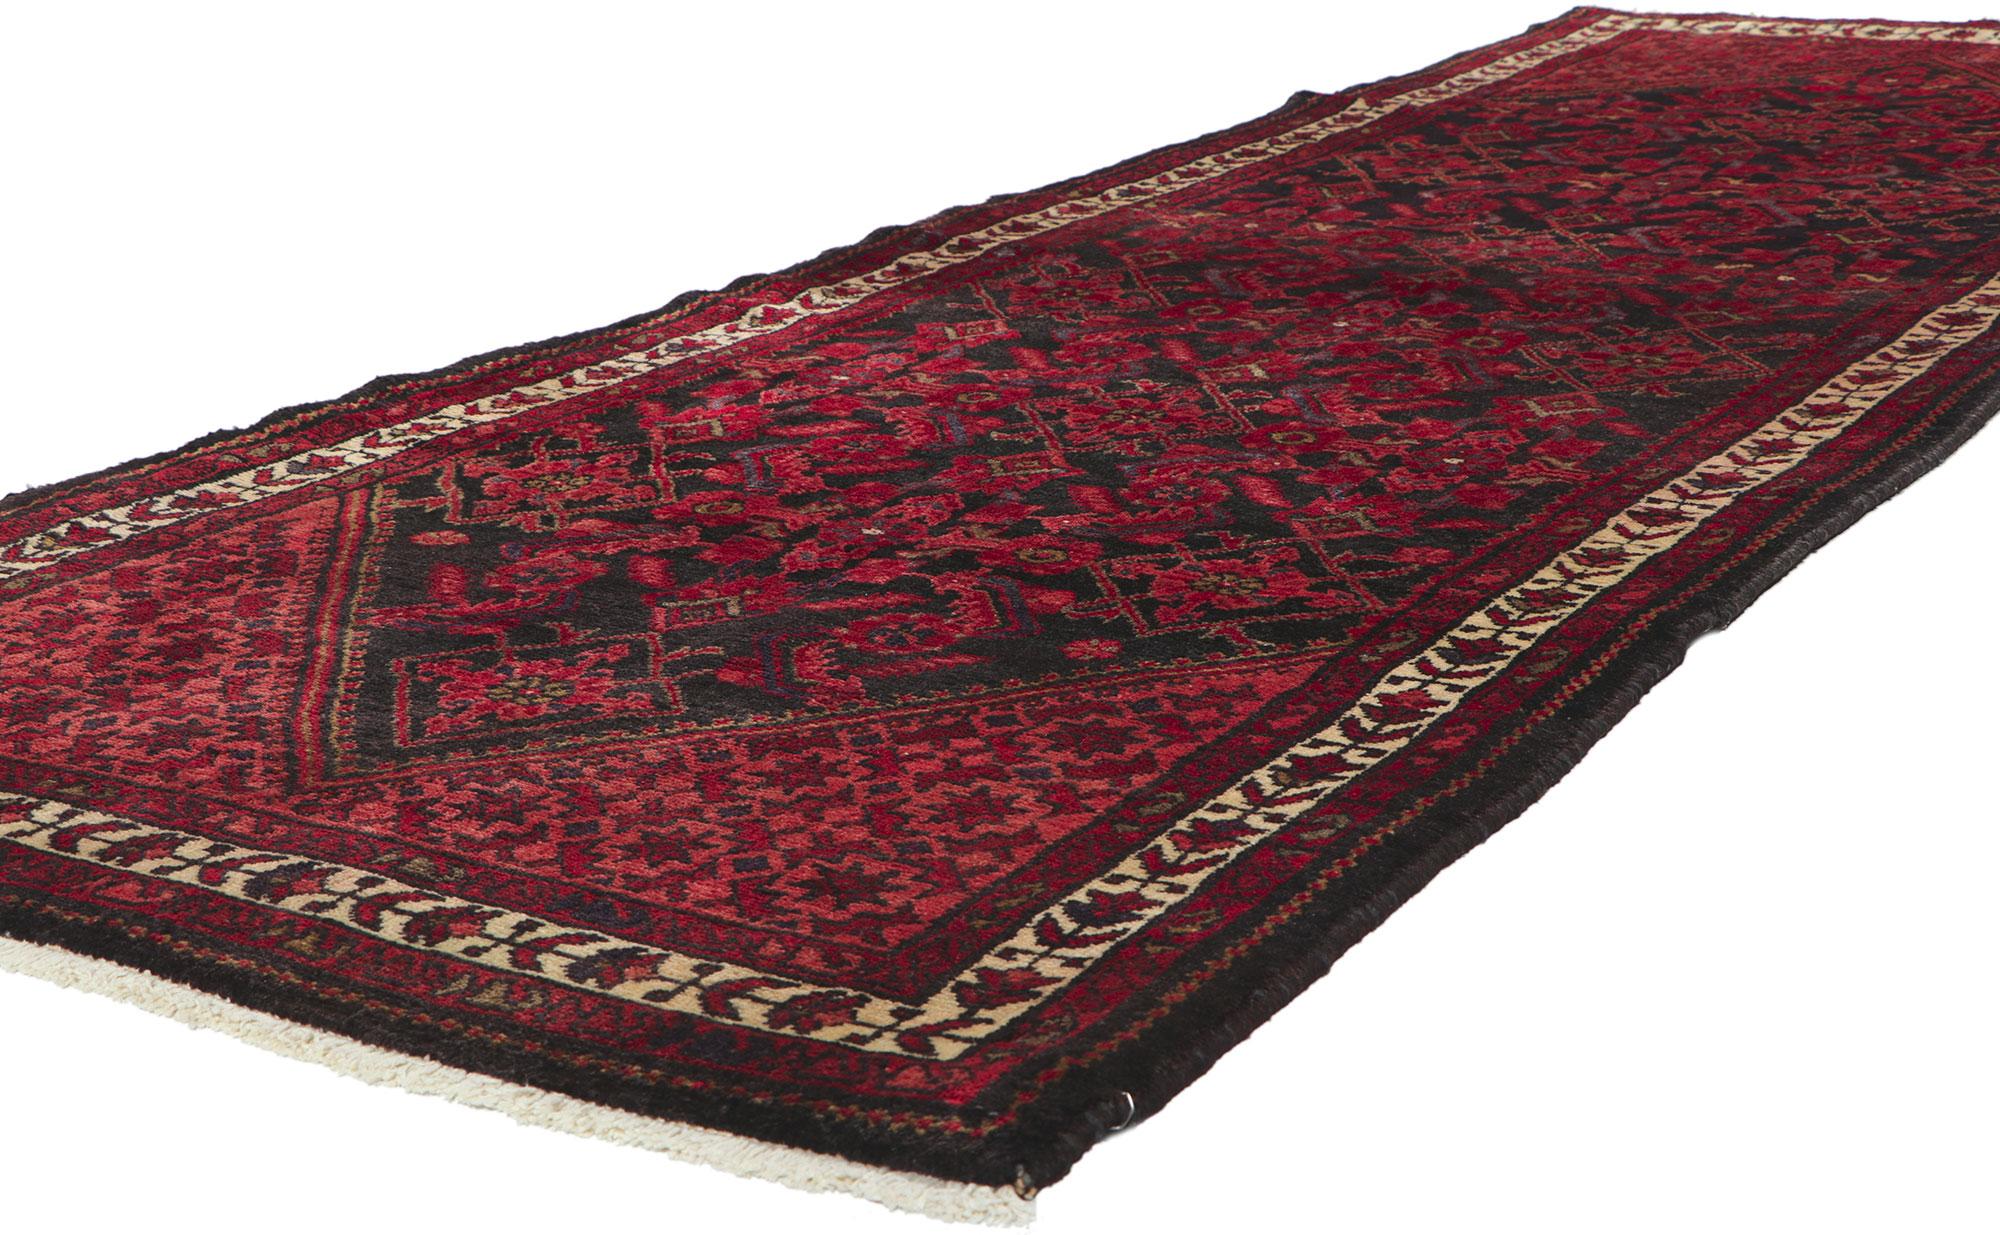 61036 Vintage Persian Malayer Rug, 03'05 x 09'08. In the shadows of design, this hand-knotted wool vintage Persian Malayer rug emerges, a brooding composition of mystery and allure. The all-over pattern, a dance of Herati motifs, unfolds on a